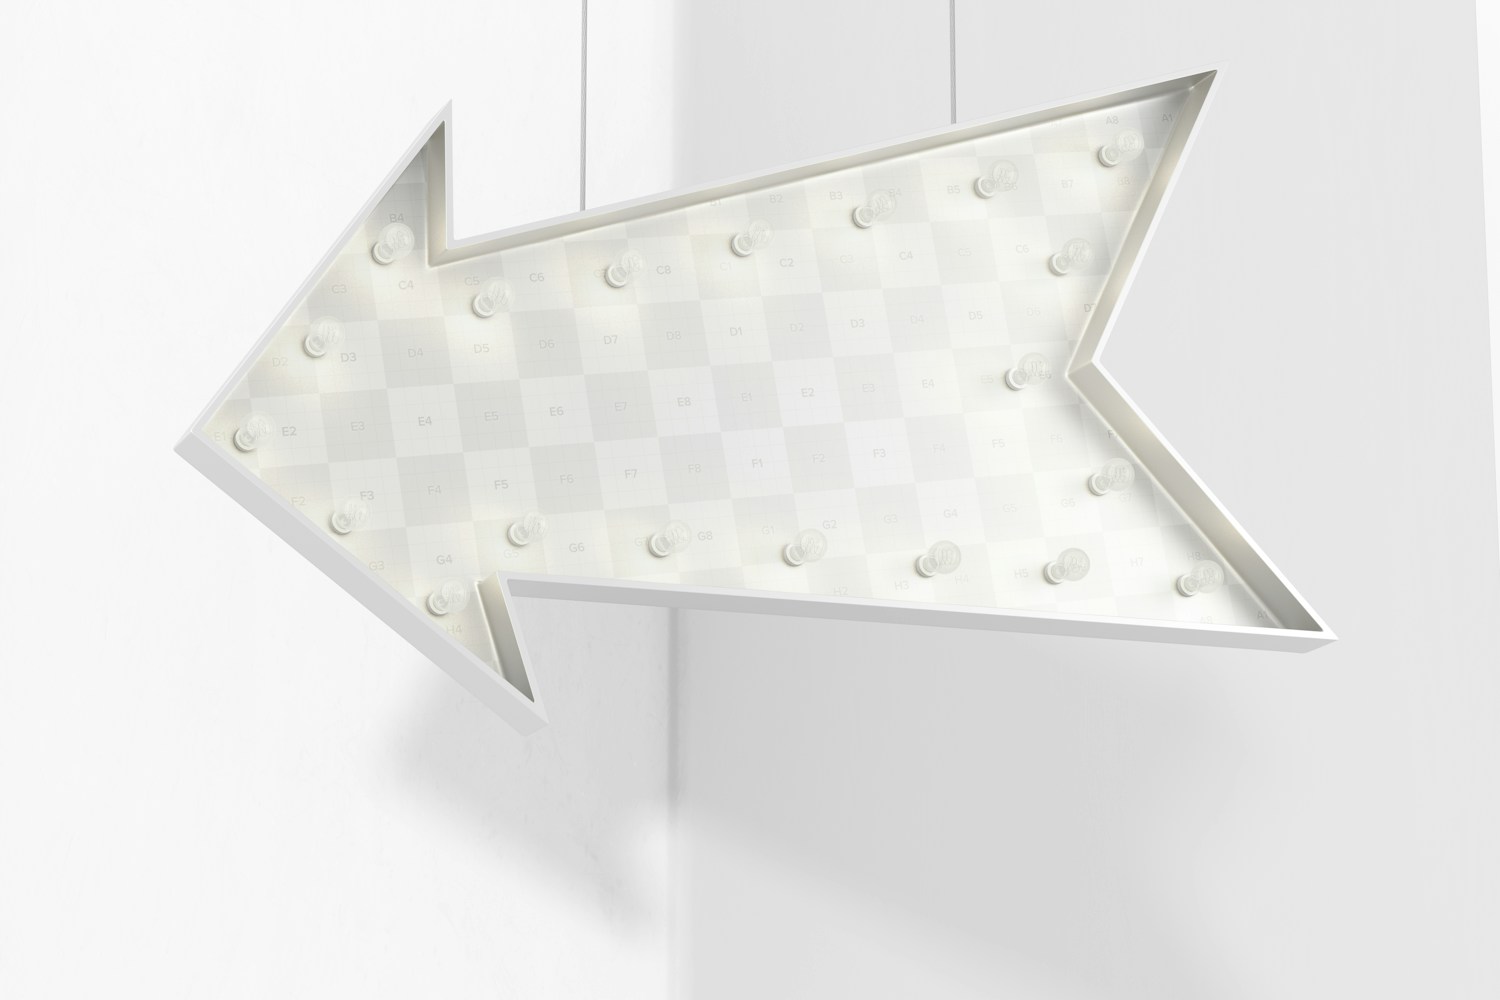 Luminous Arrow Promotional Sign on Stand Mockup, Hanging